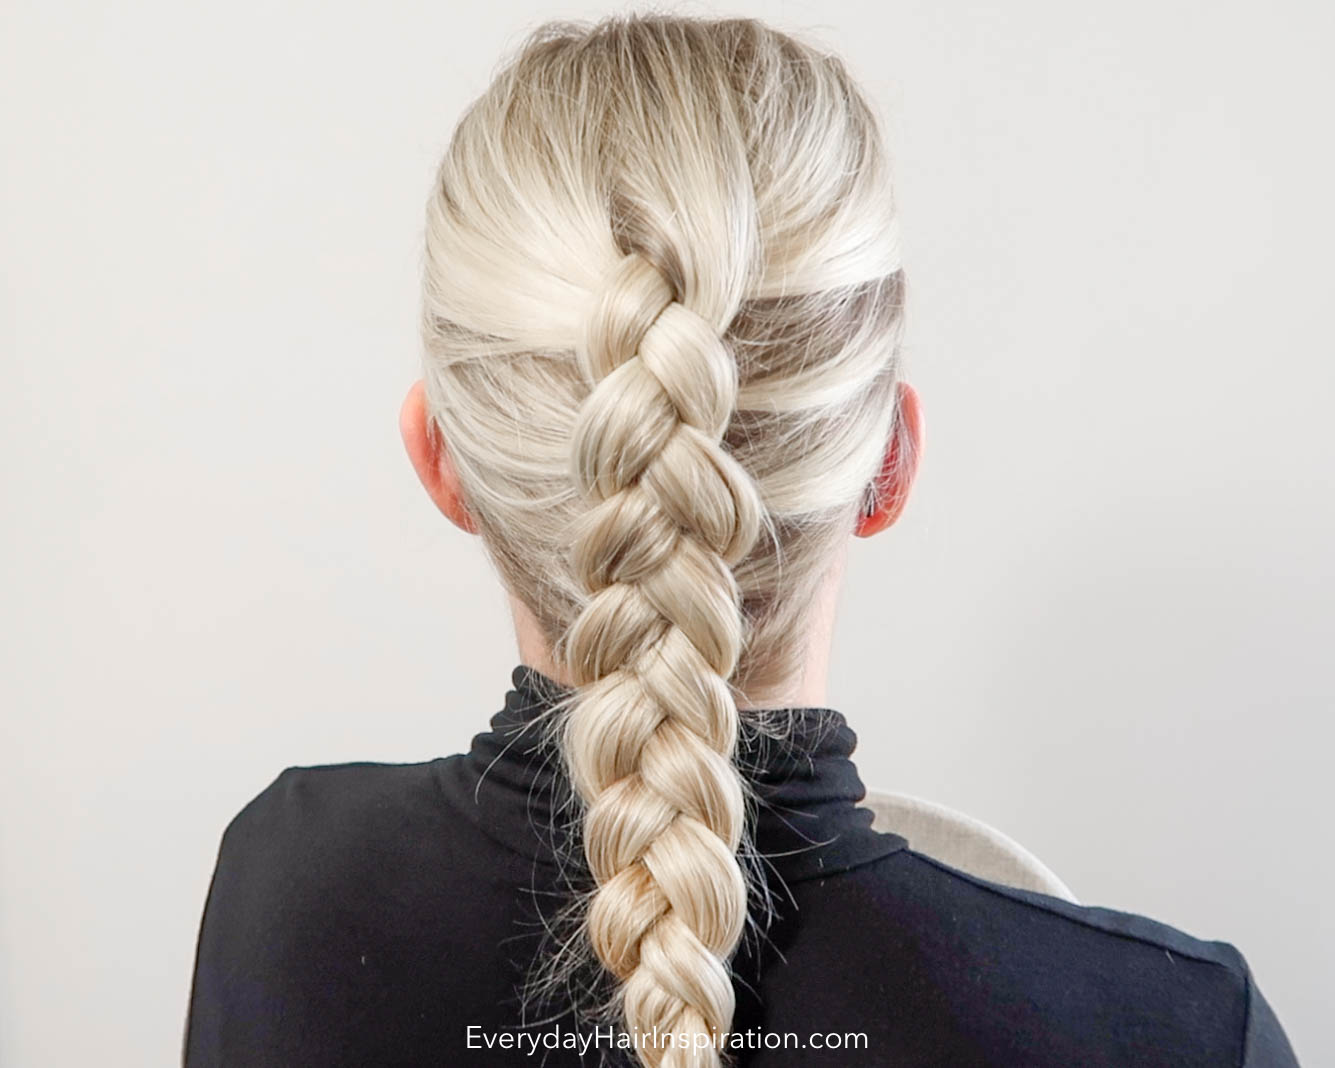 How To Dutch Braid Your Own Hair - Hand-placements, How To Add Hair & More  - Everyday Hair inspiration